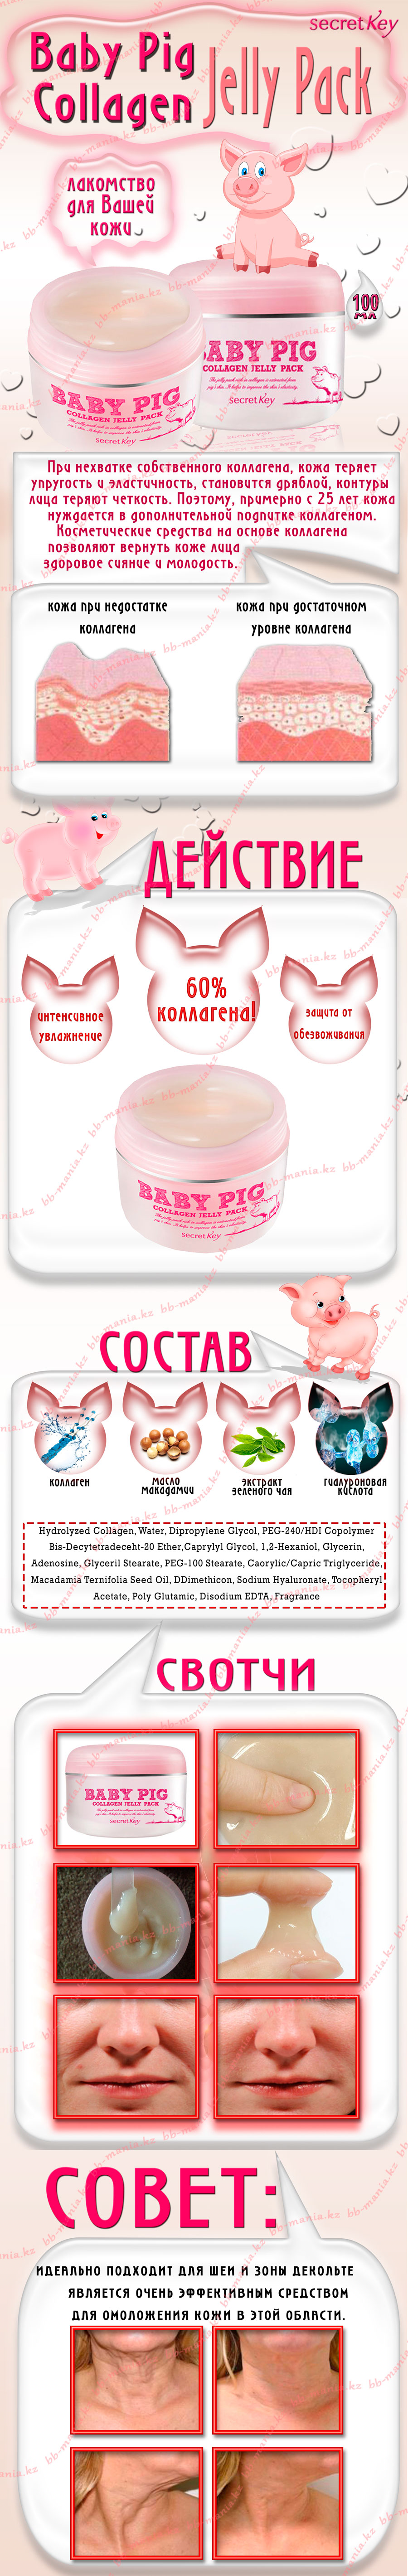 Baby-Pig-Jelly-Pack (3)